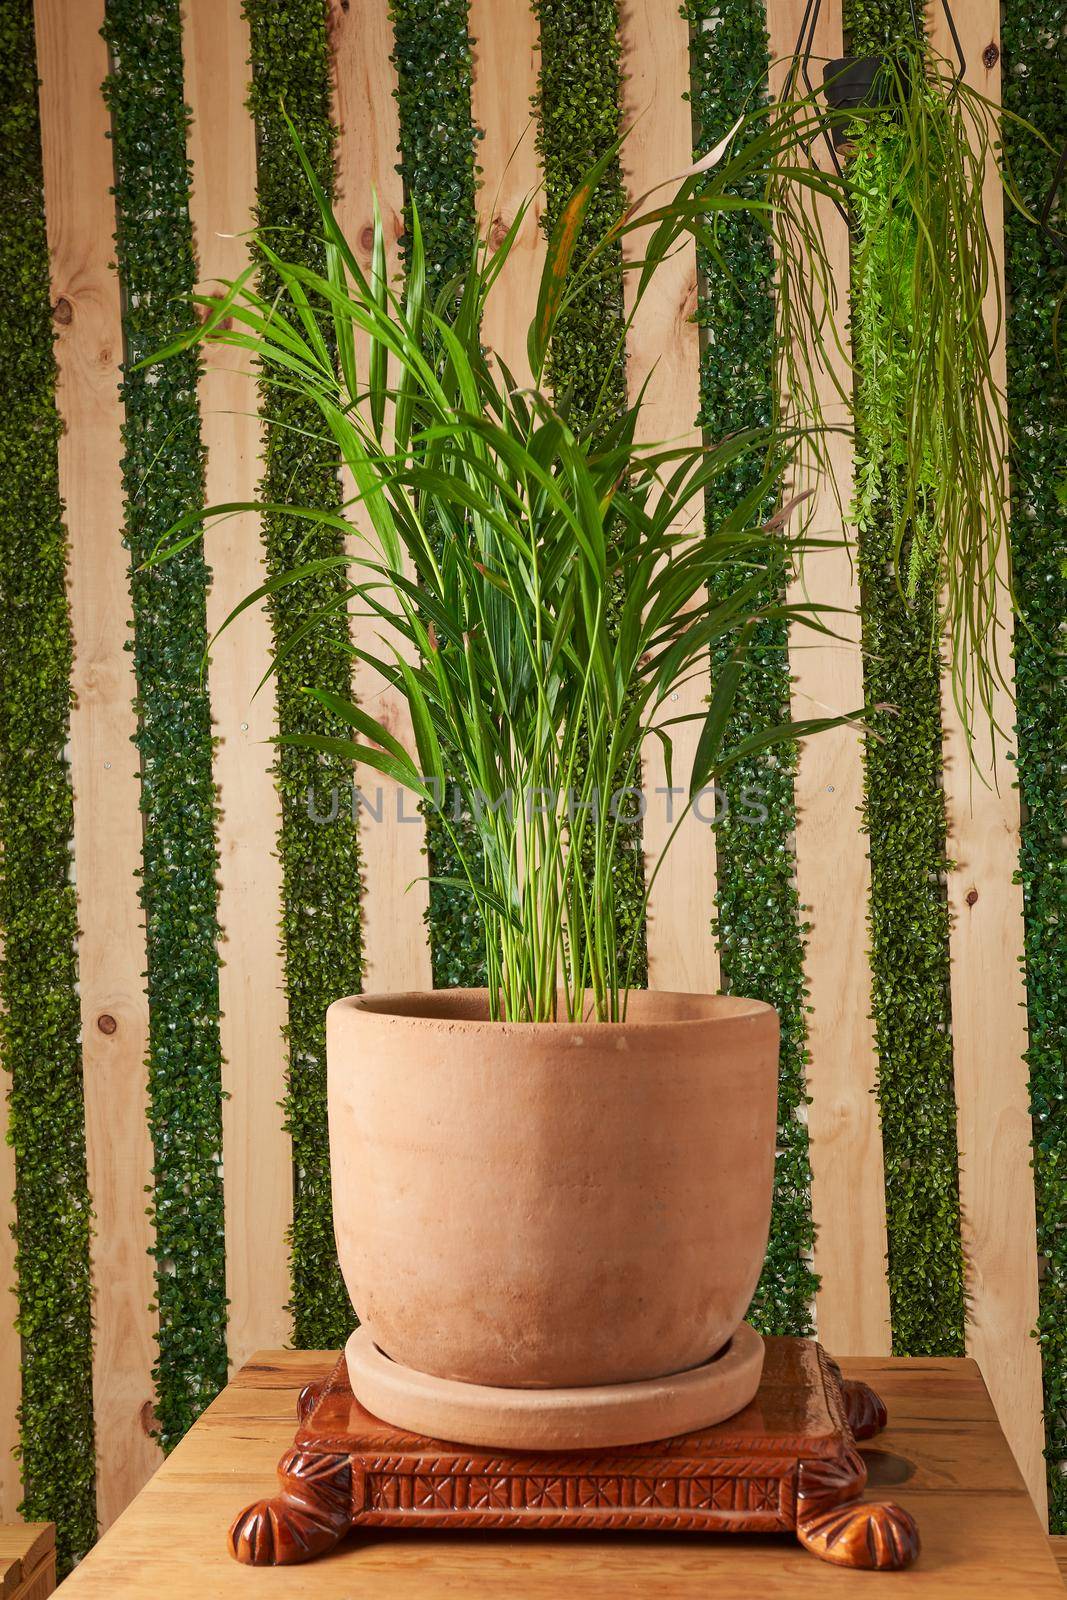 plant in clay pots on wooden table. decorative flowerpots.